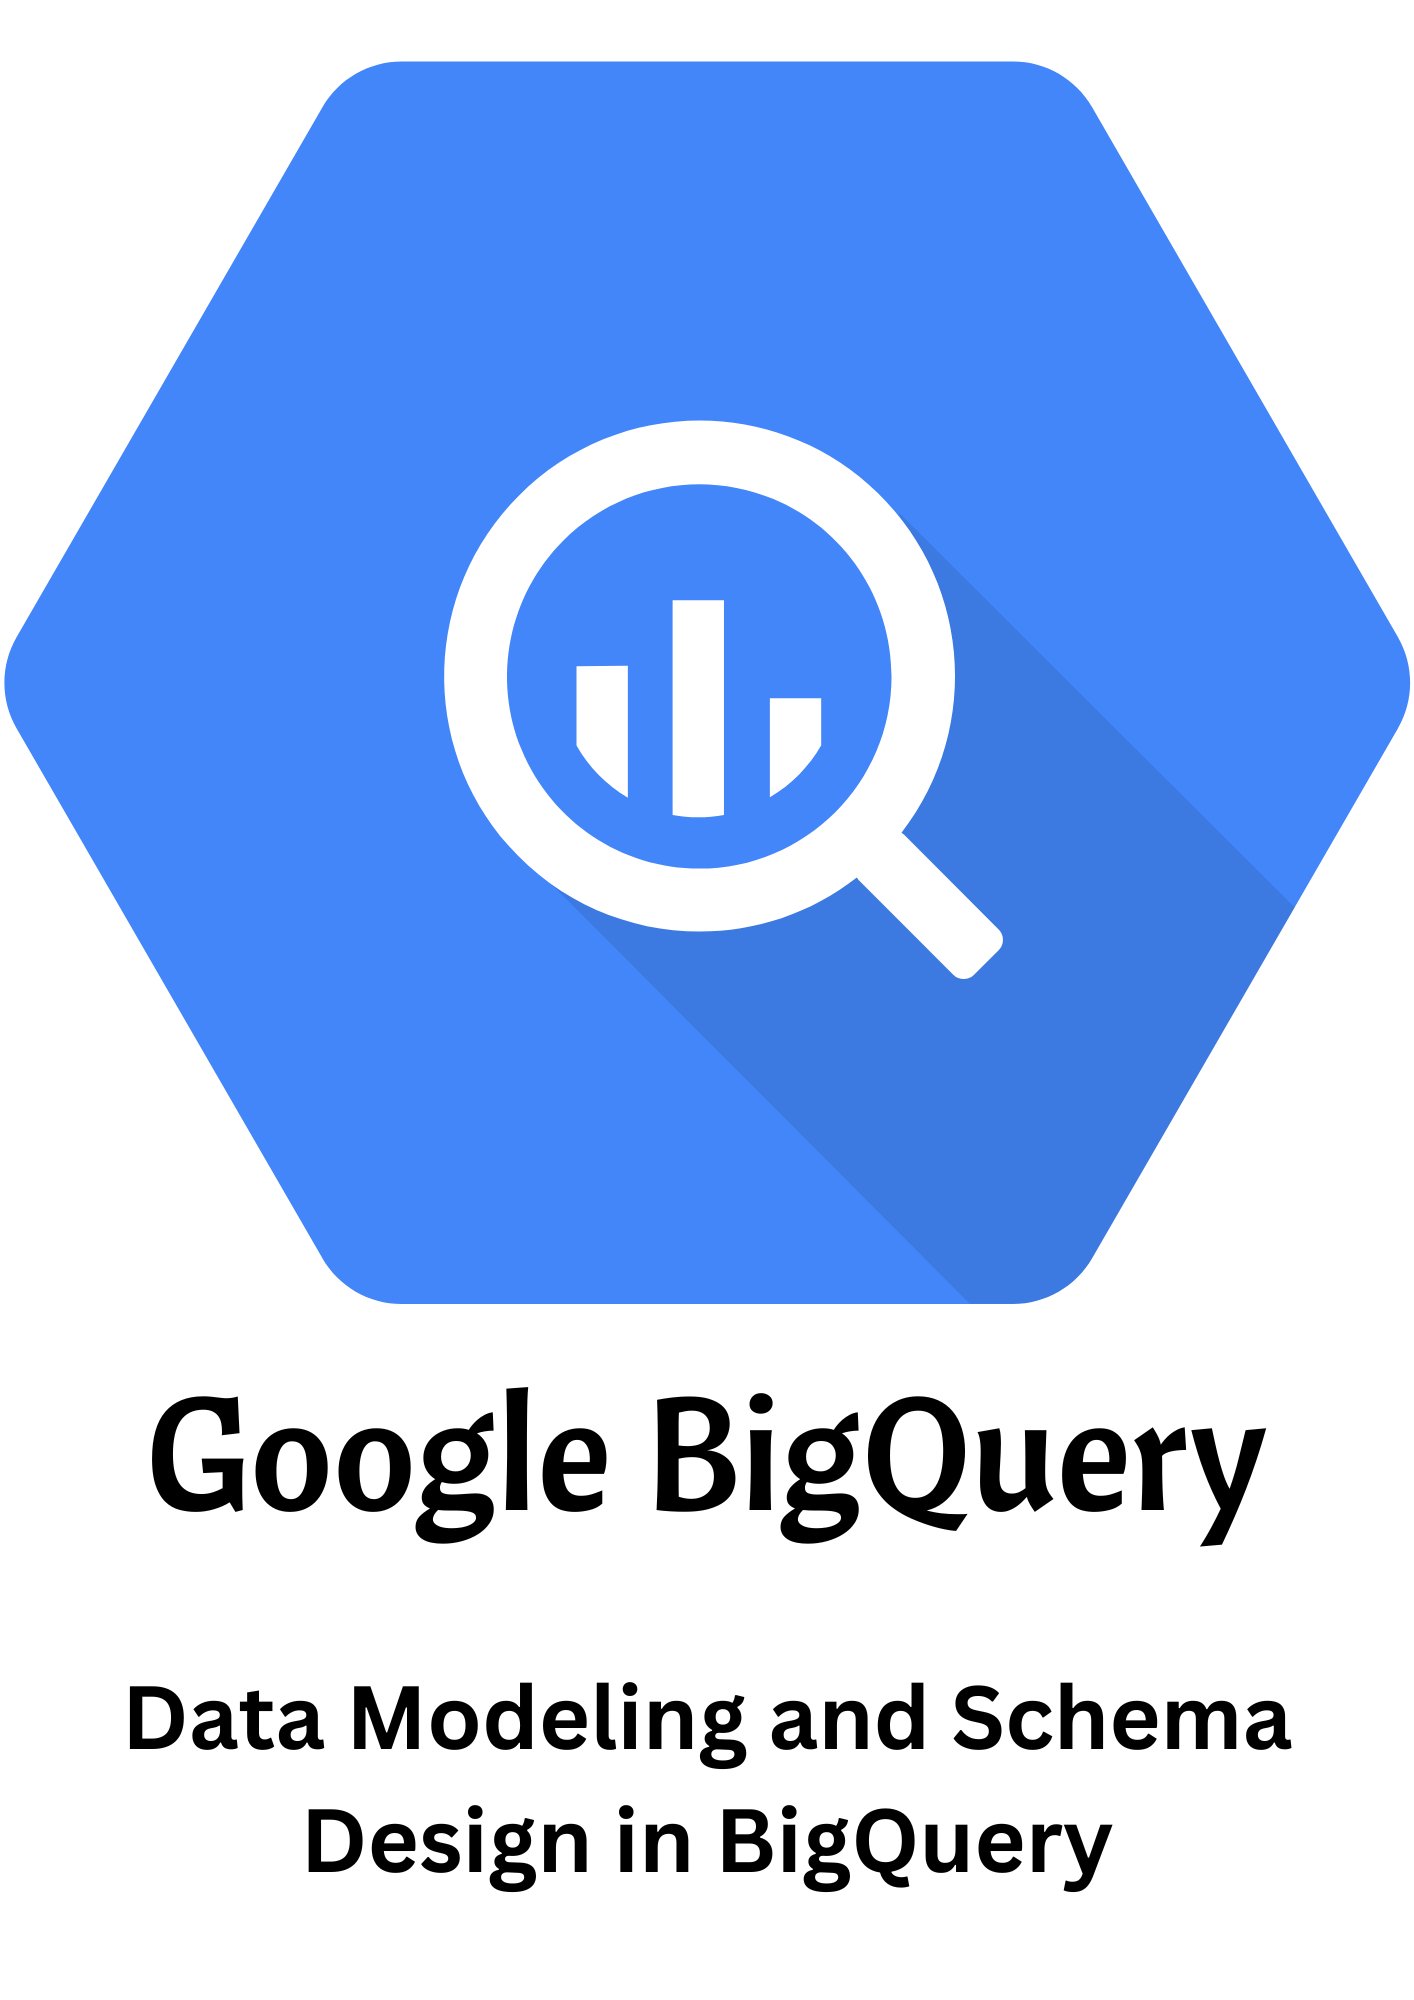 Data Modeling and Schema Design in BigQuery